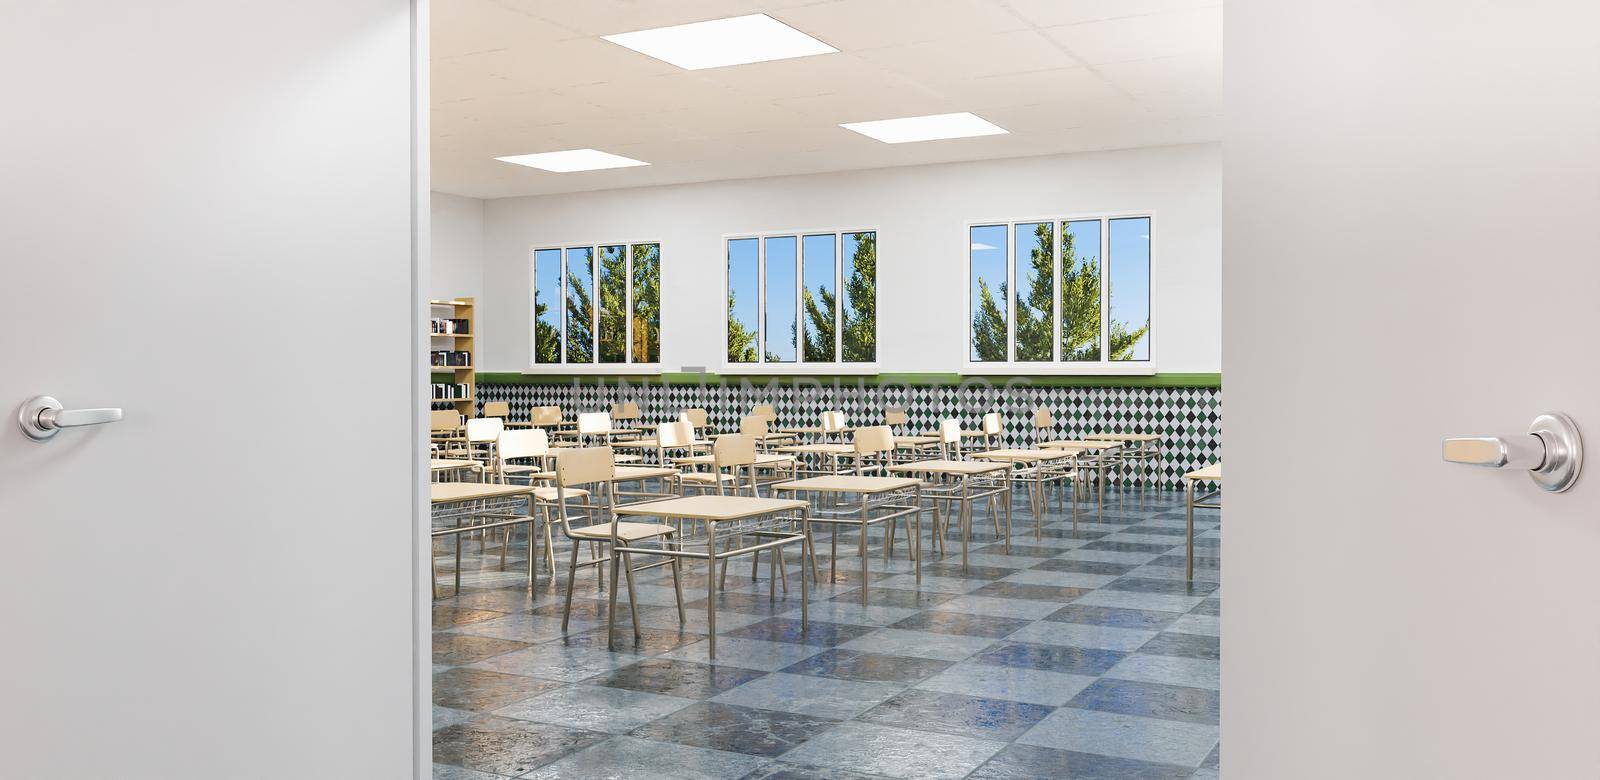 education classroom seen from the entrance door with open windows and pine trees behind them. 3d rendering